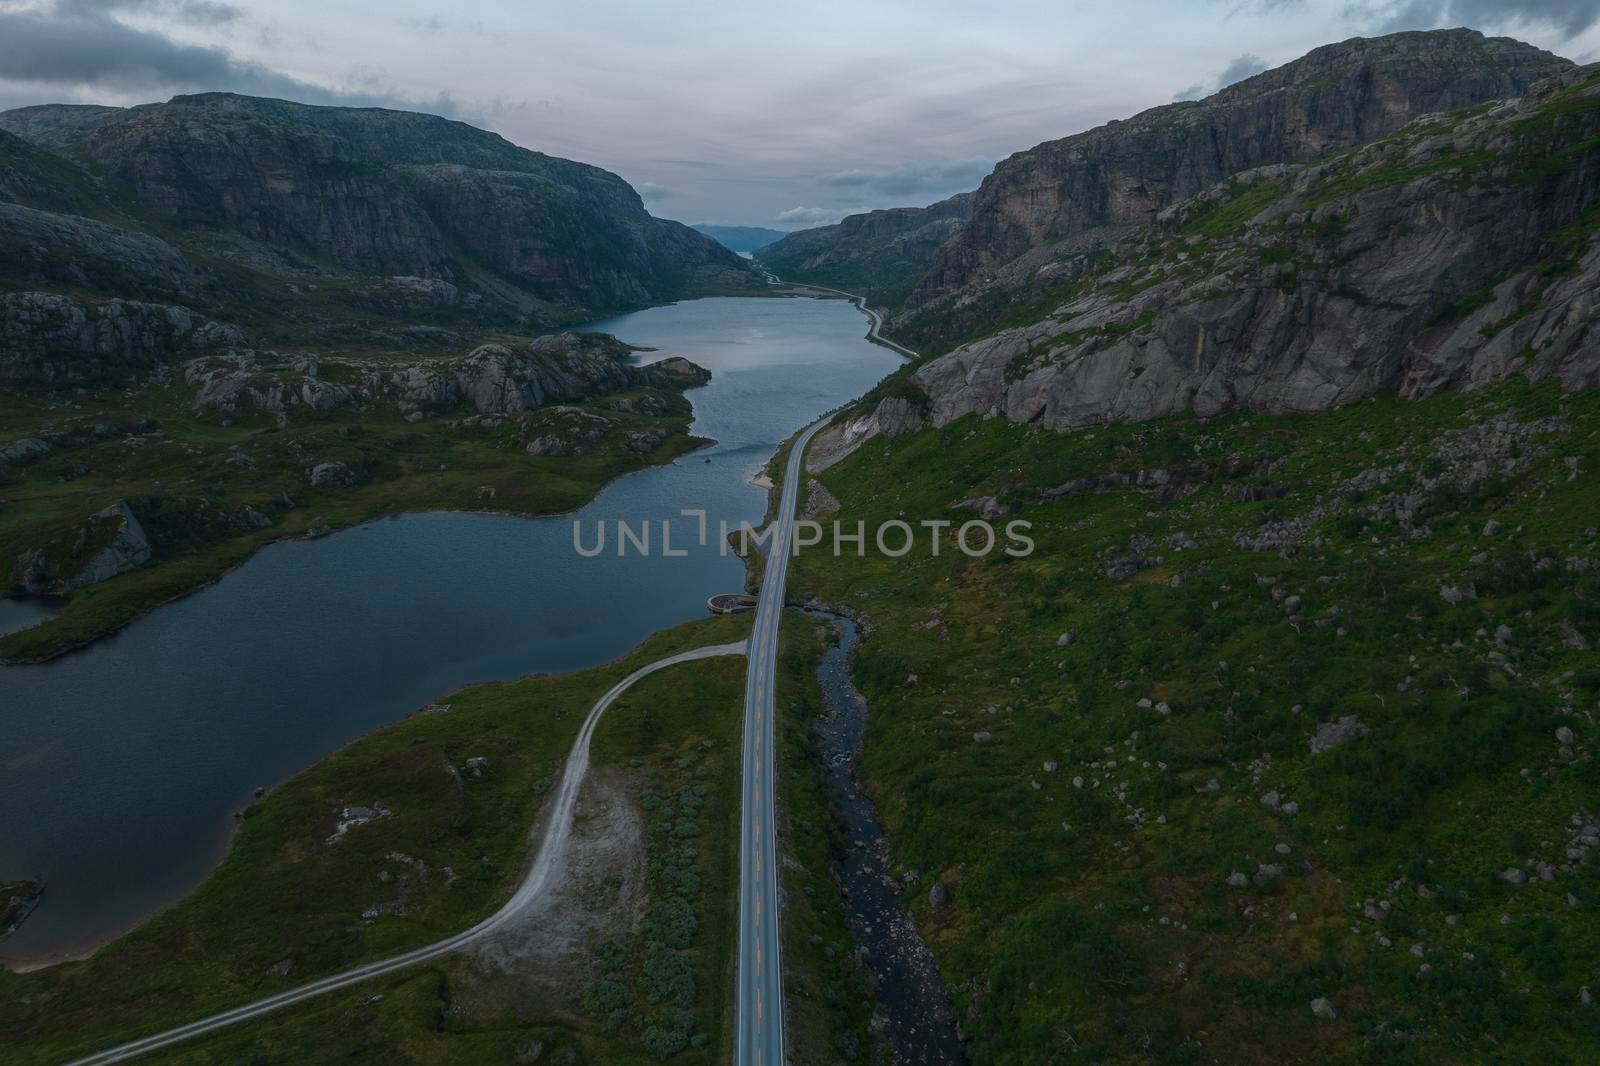 Vestland County Mountain Highway in Southern Norway, Europe. Aerial View.